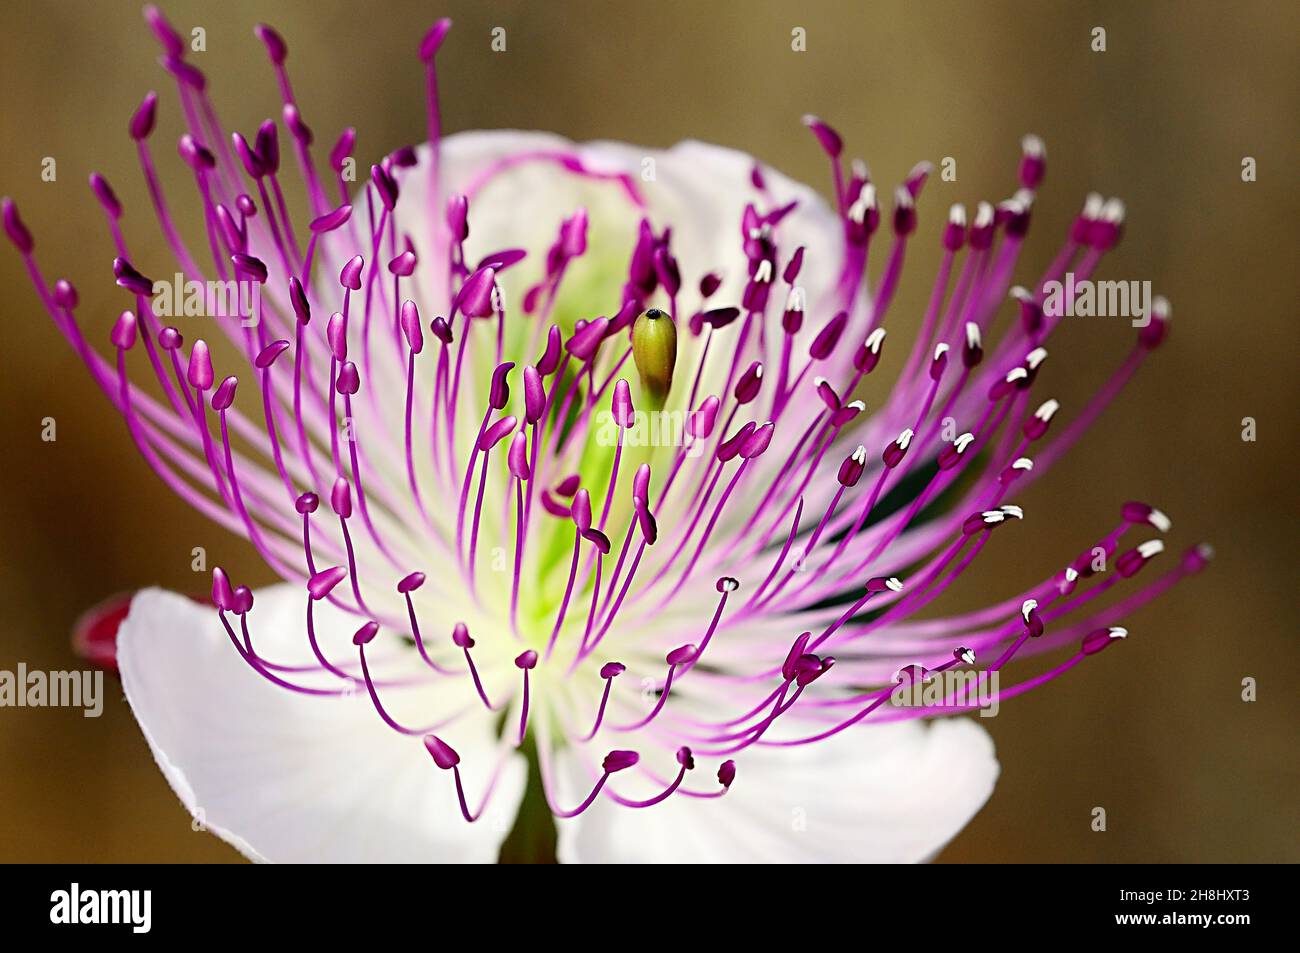 Capparis spinosa - the caper, is a shrubby plant native to the Mediterranean region. Stock Photo